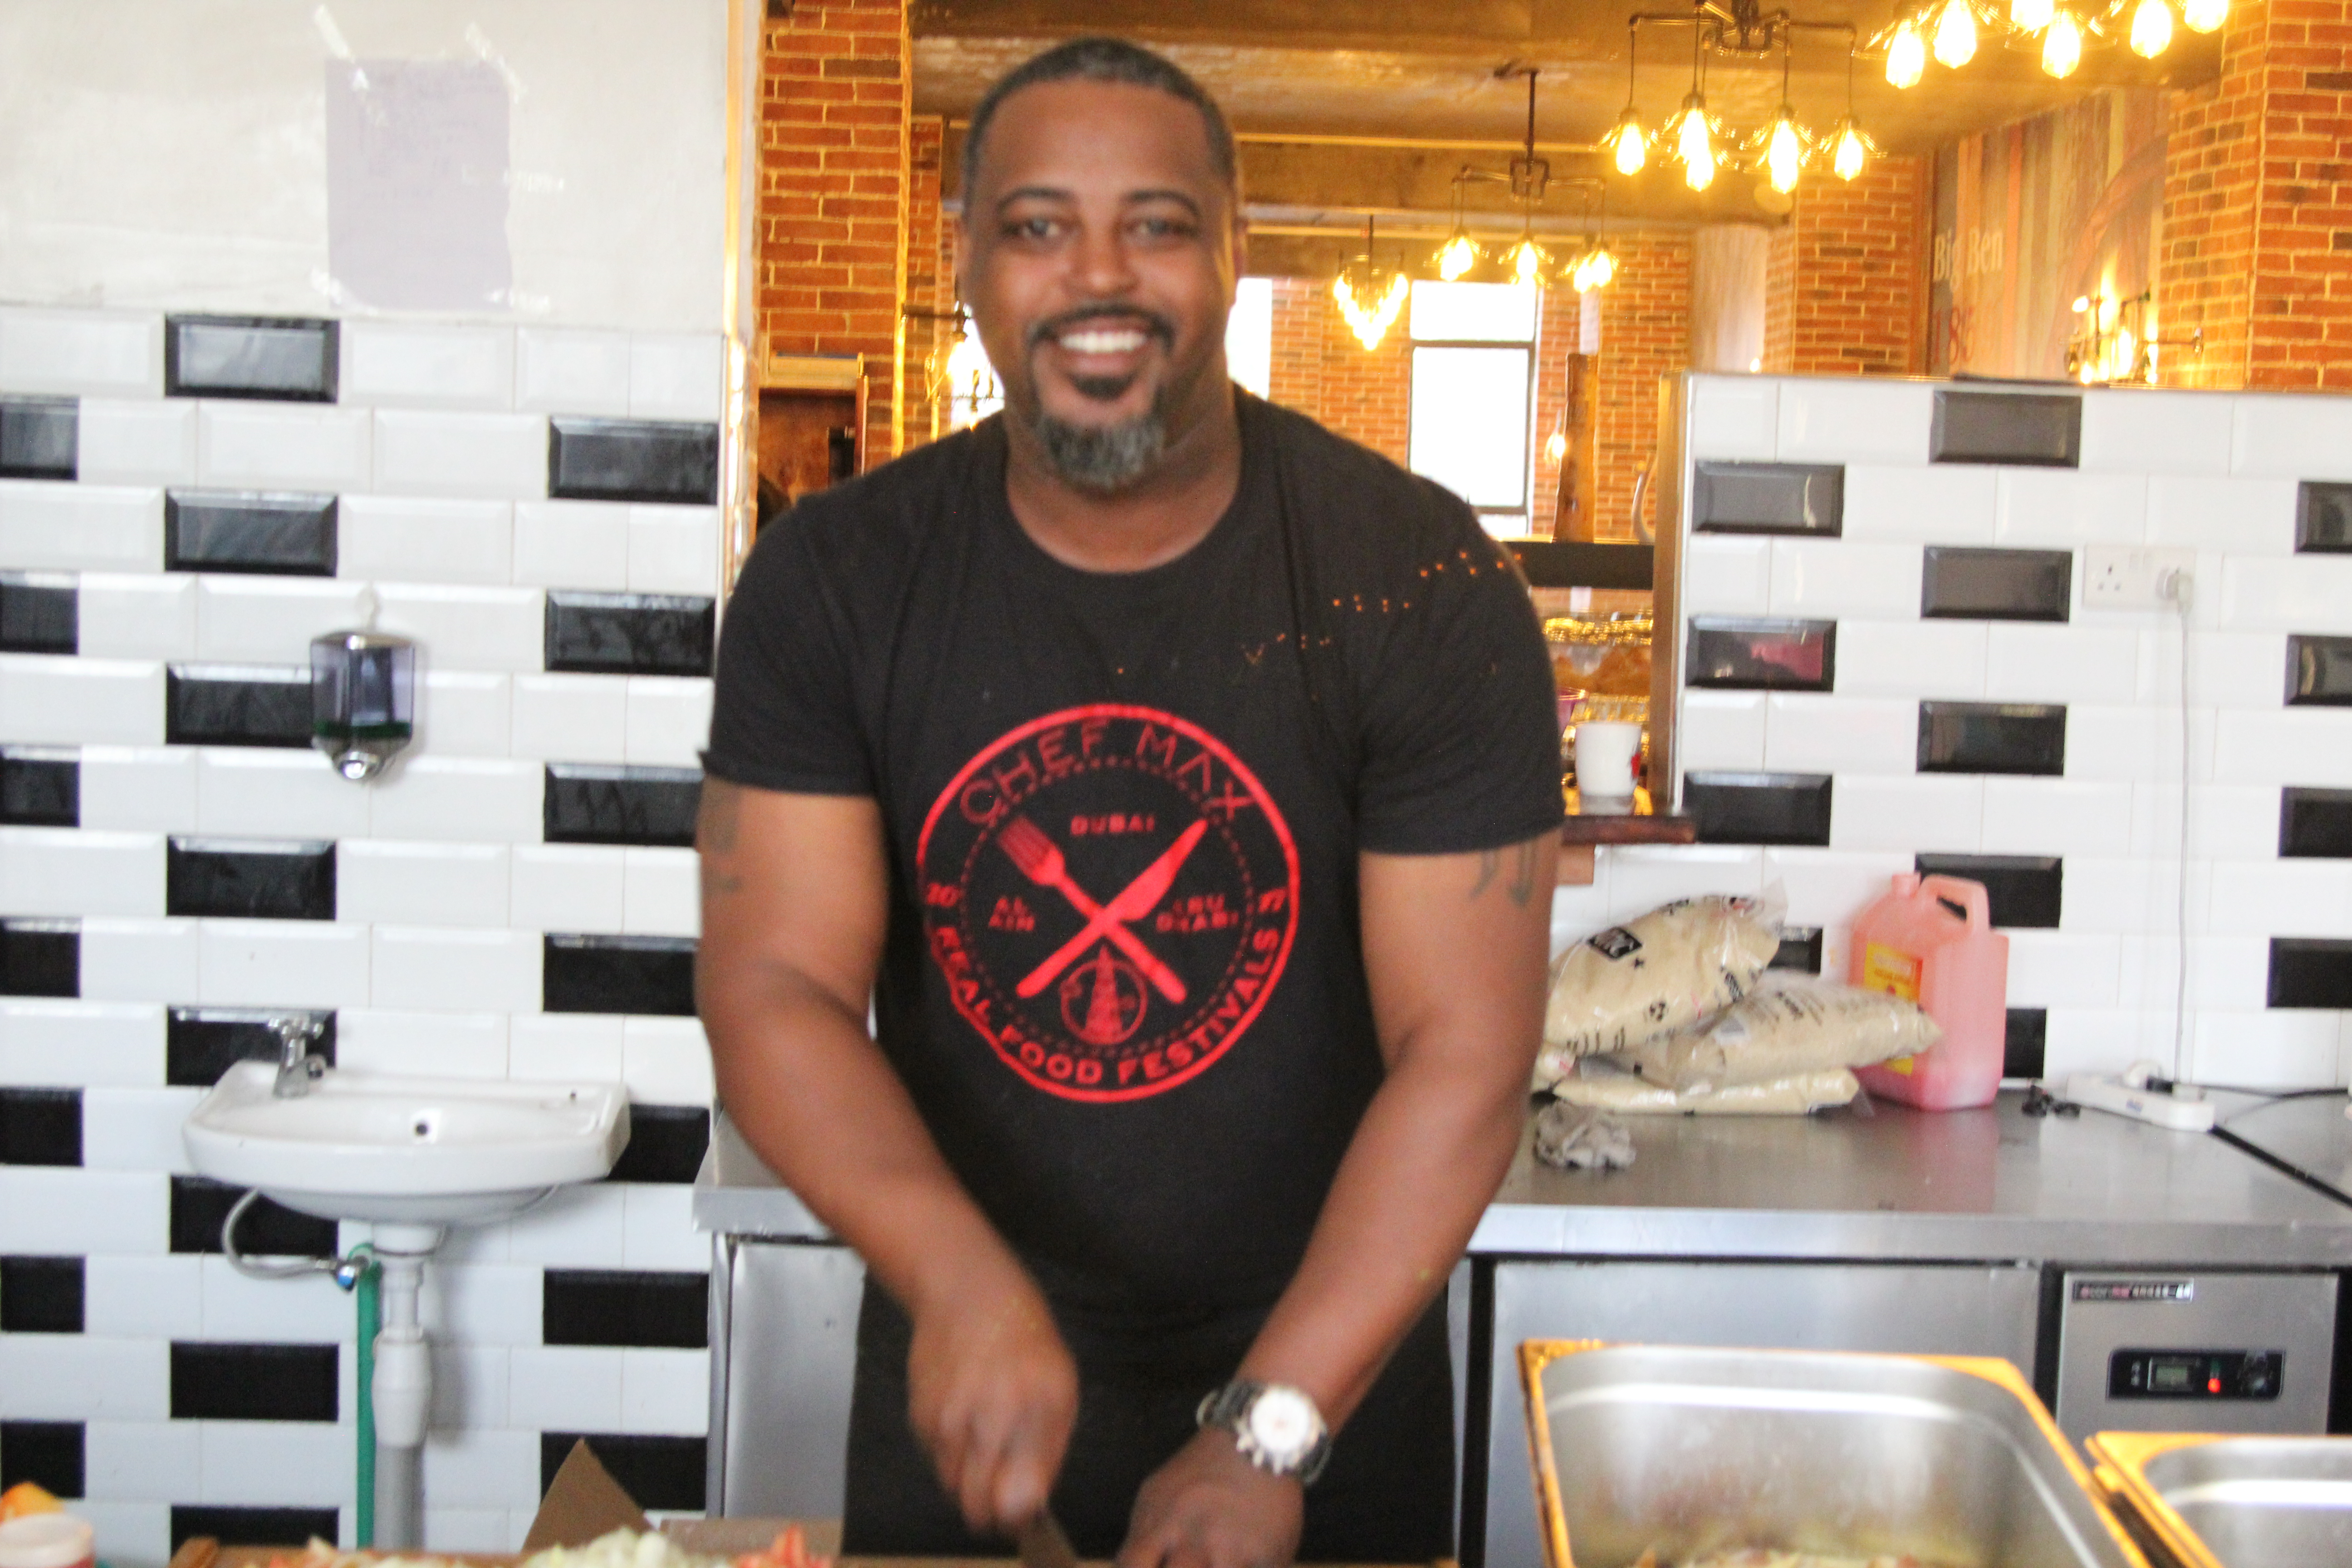 Detroit's Chef Max Tells Us Why The 'Motor City' Should Be On Our Travel To-Do List